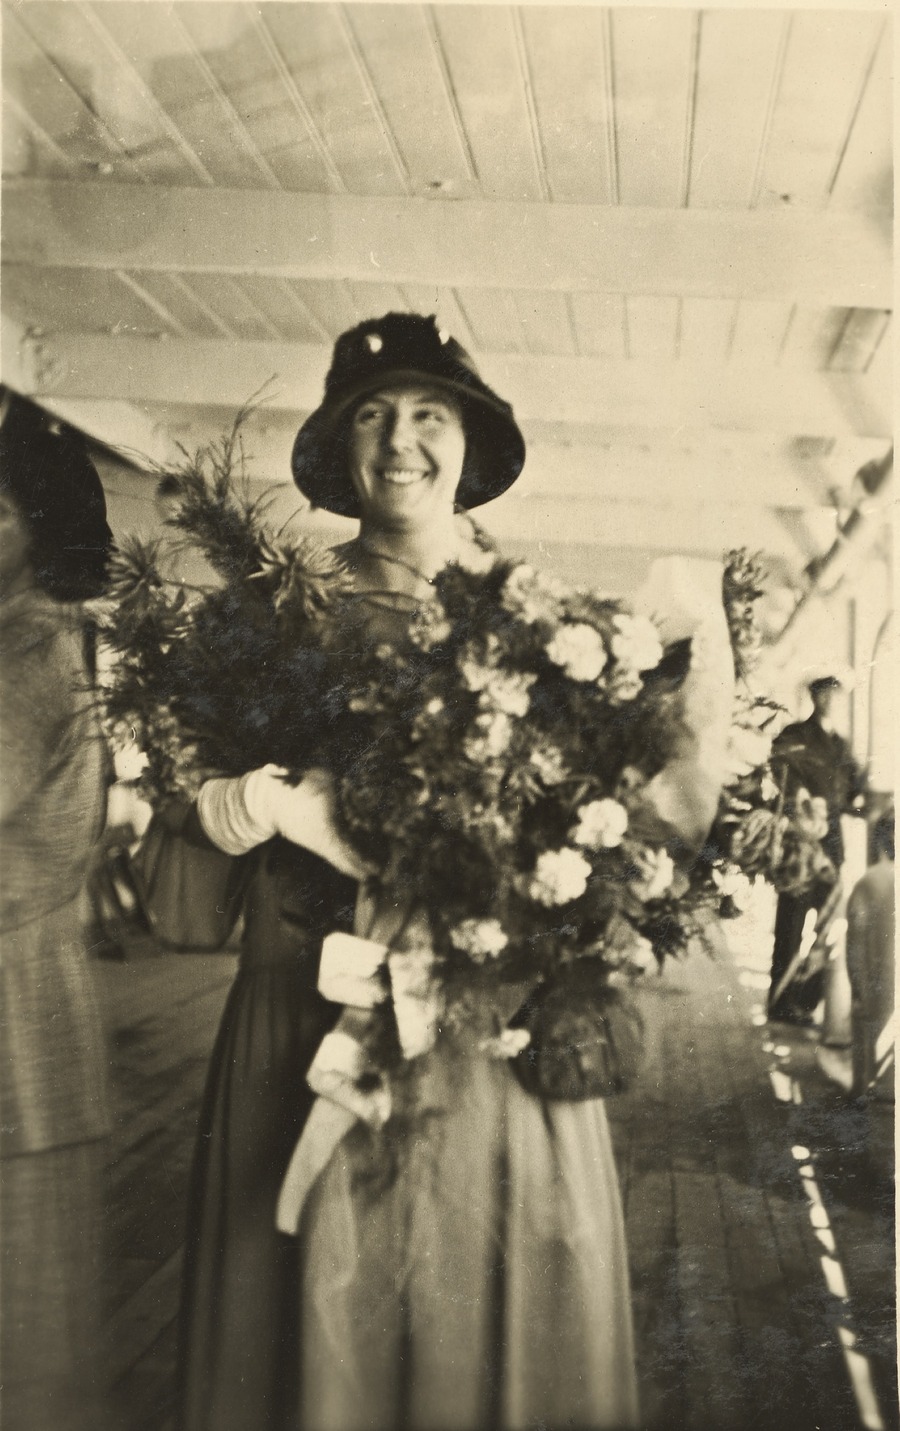 Black and white photograph of a woman wearing a hat holding a bouquet of flowers